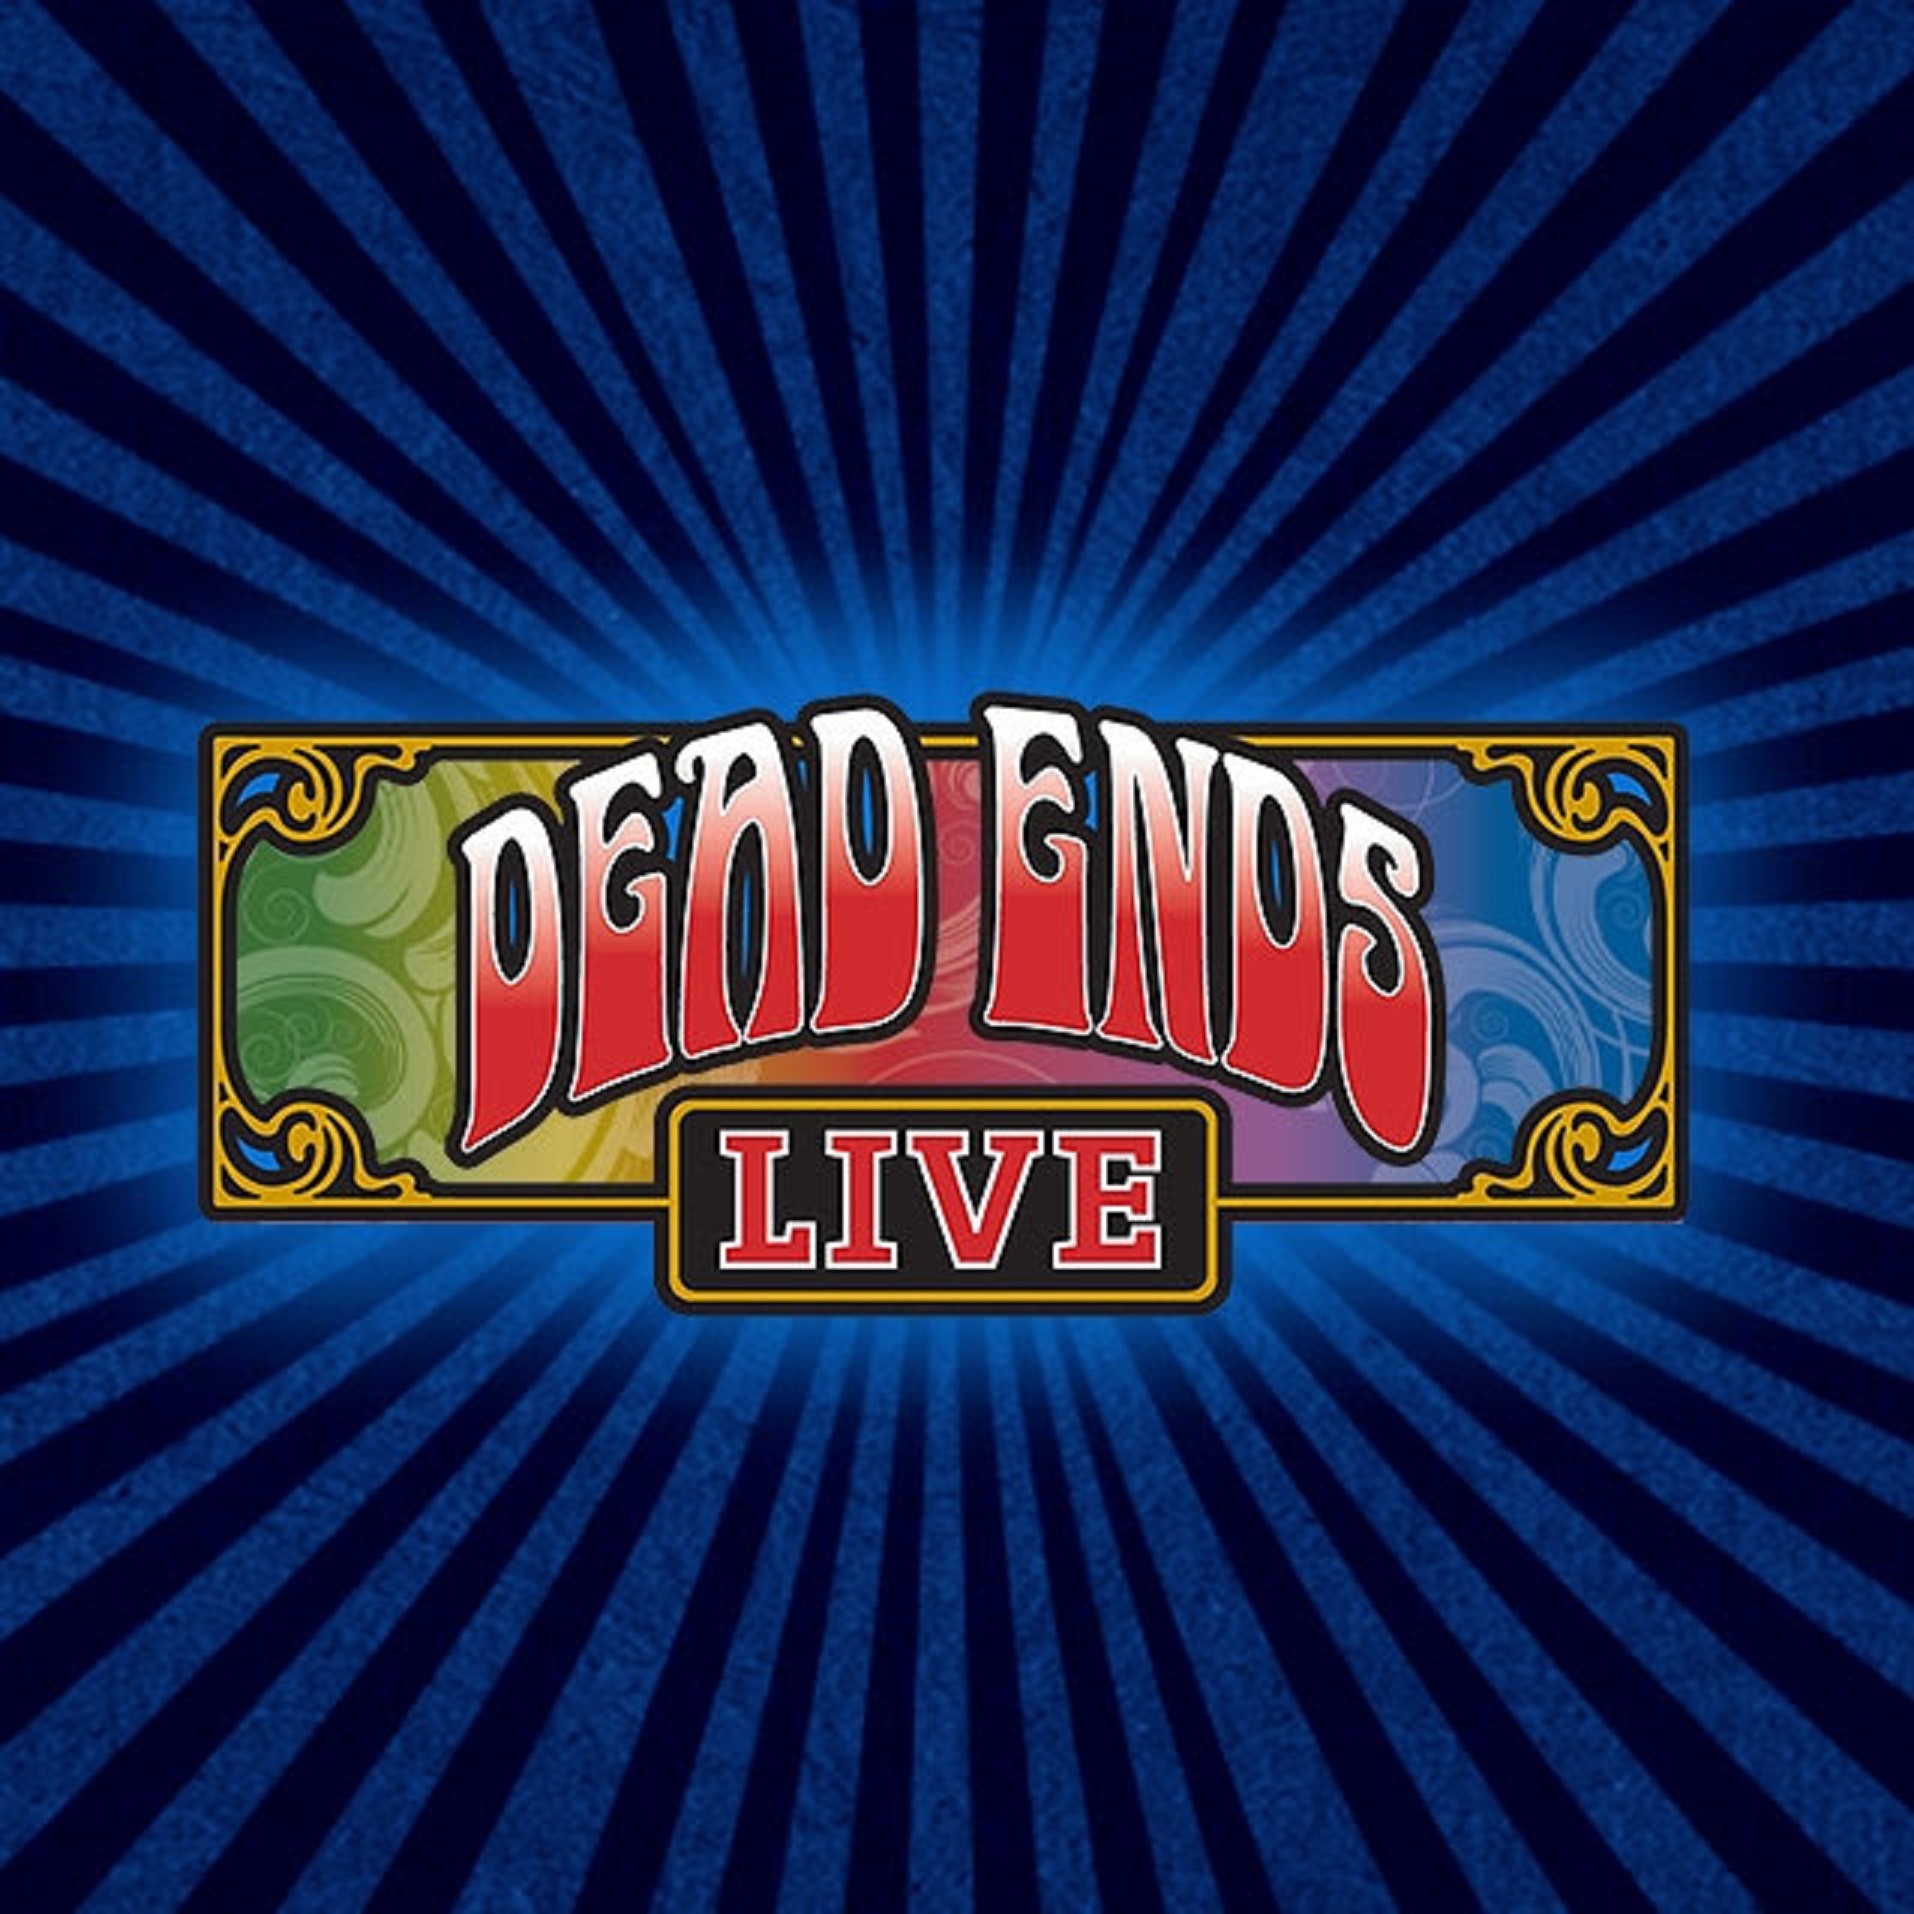 DEAD ENDS LIVE RETURNS TO EDMONTON This Weekend!